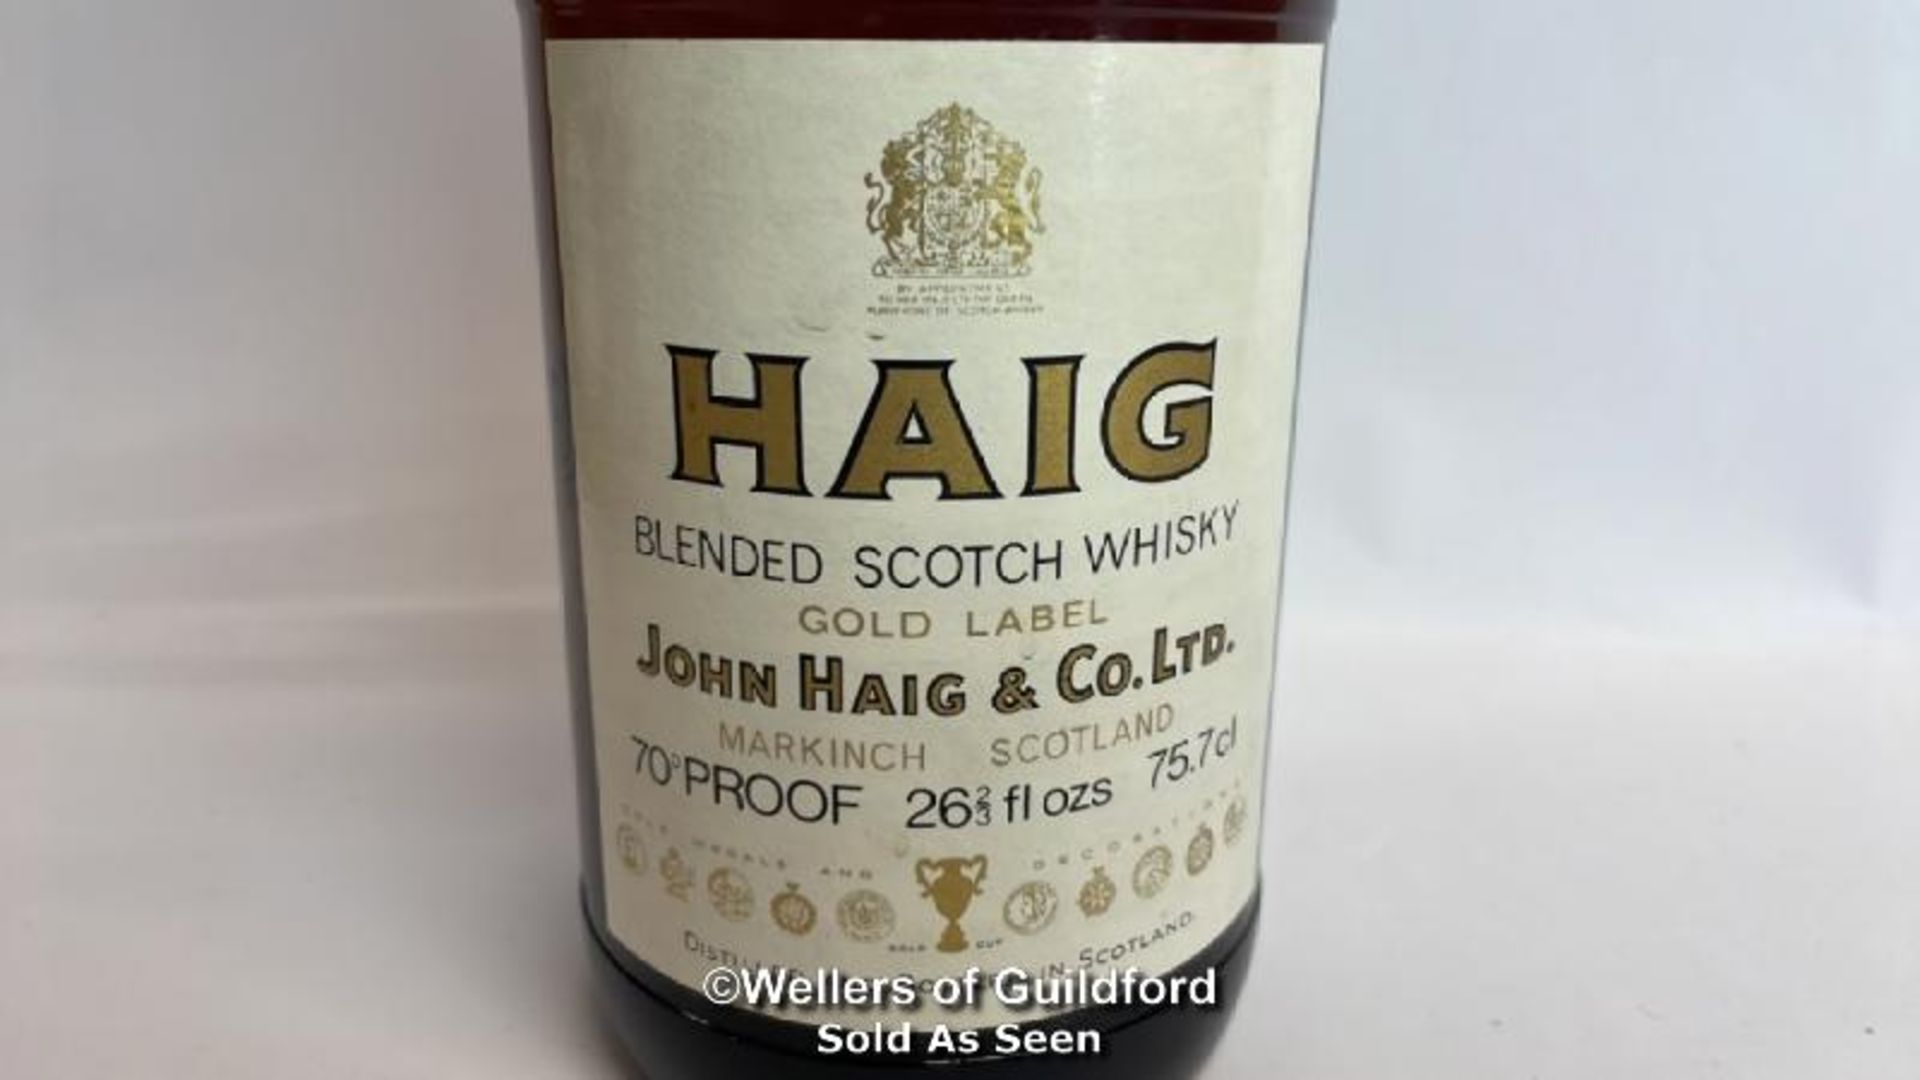 Haig Blended Scotch Whisky Gold Label, 70 Proof, 75.7cl / Please see images for fill level and - Image 4 of 10